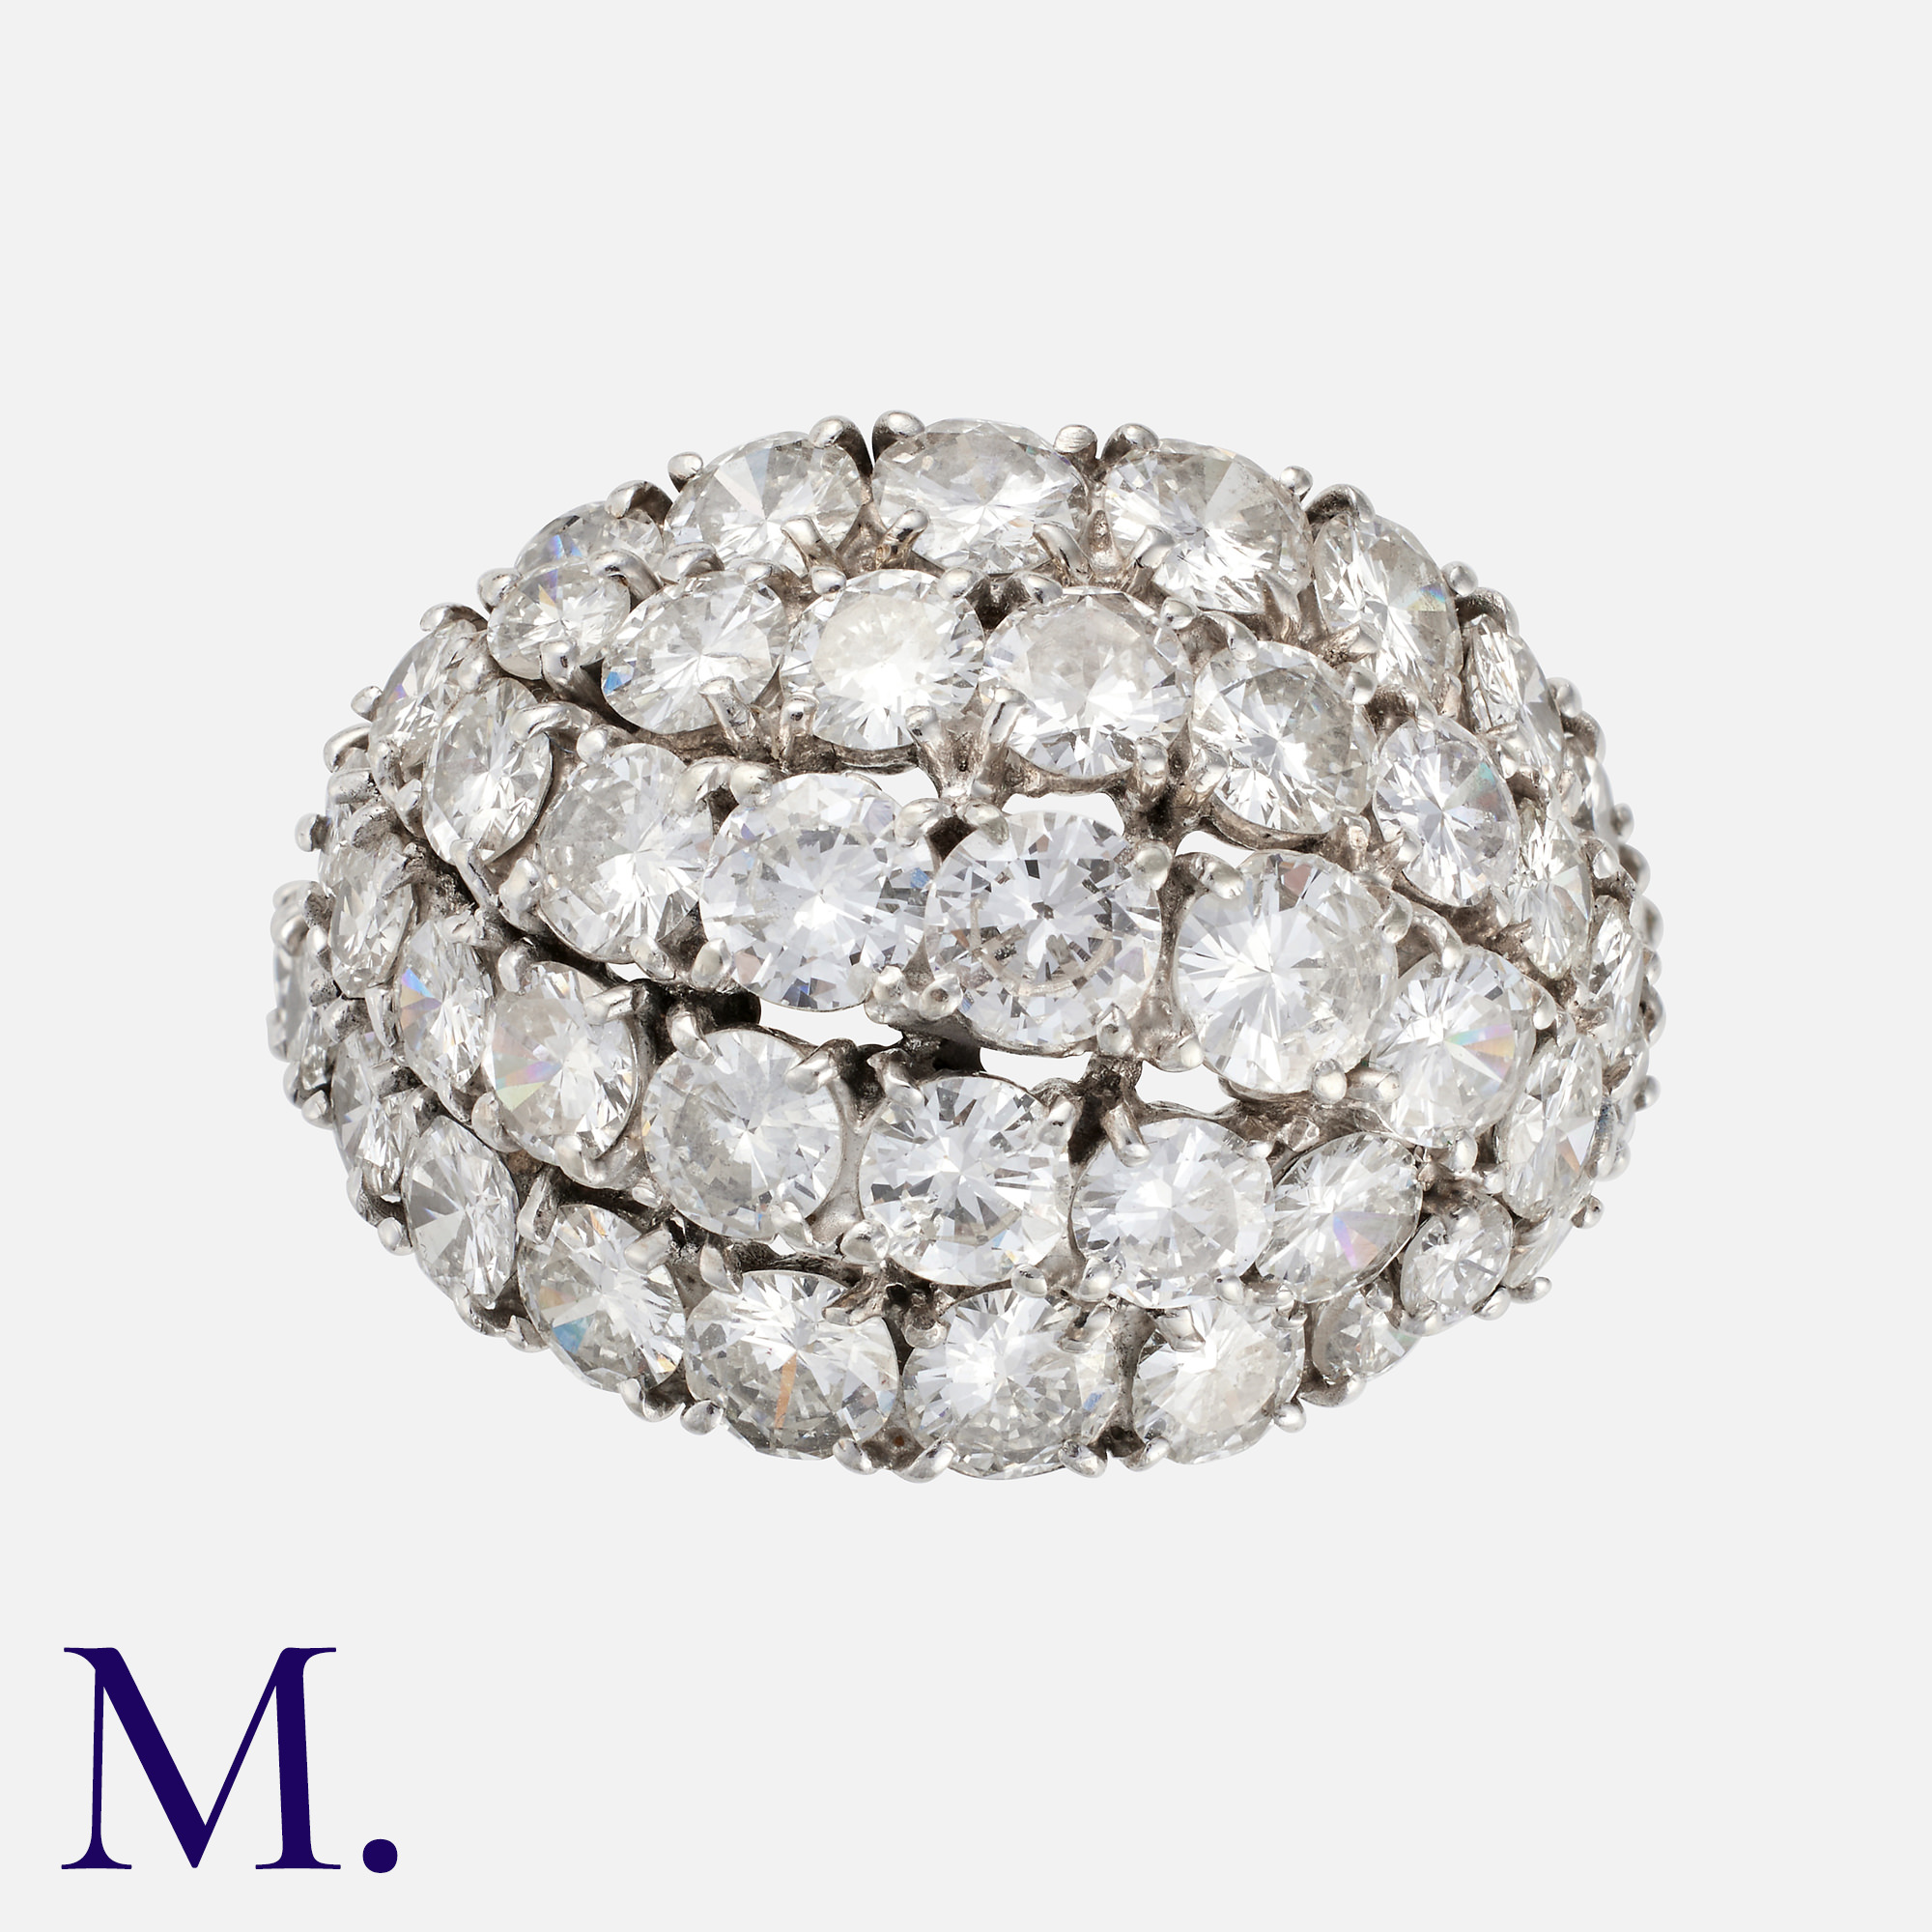 CARTIER. A Diamond Bombe Ring in platinum, the bombé form set with round cut diamonds totalling